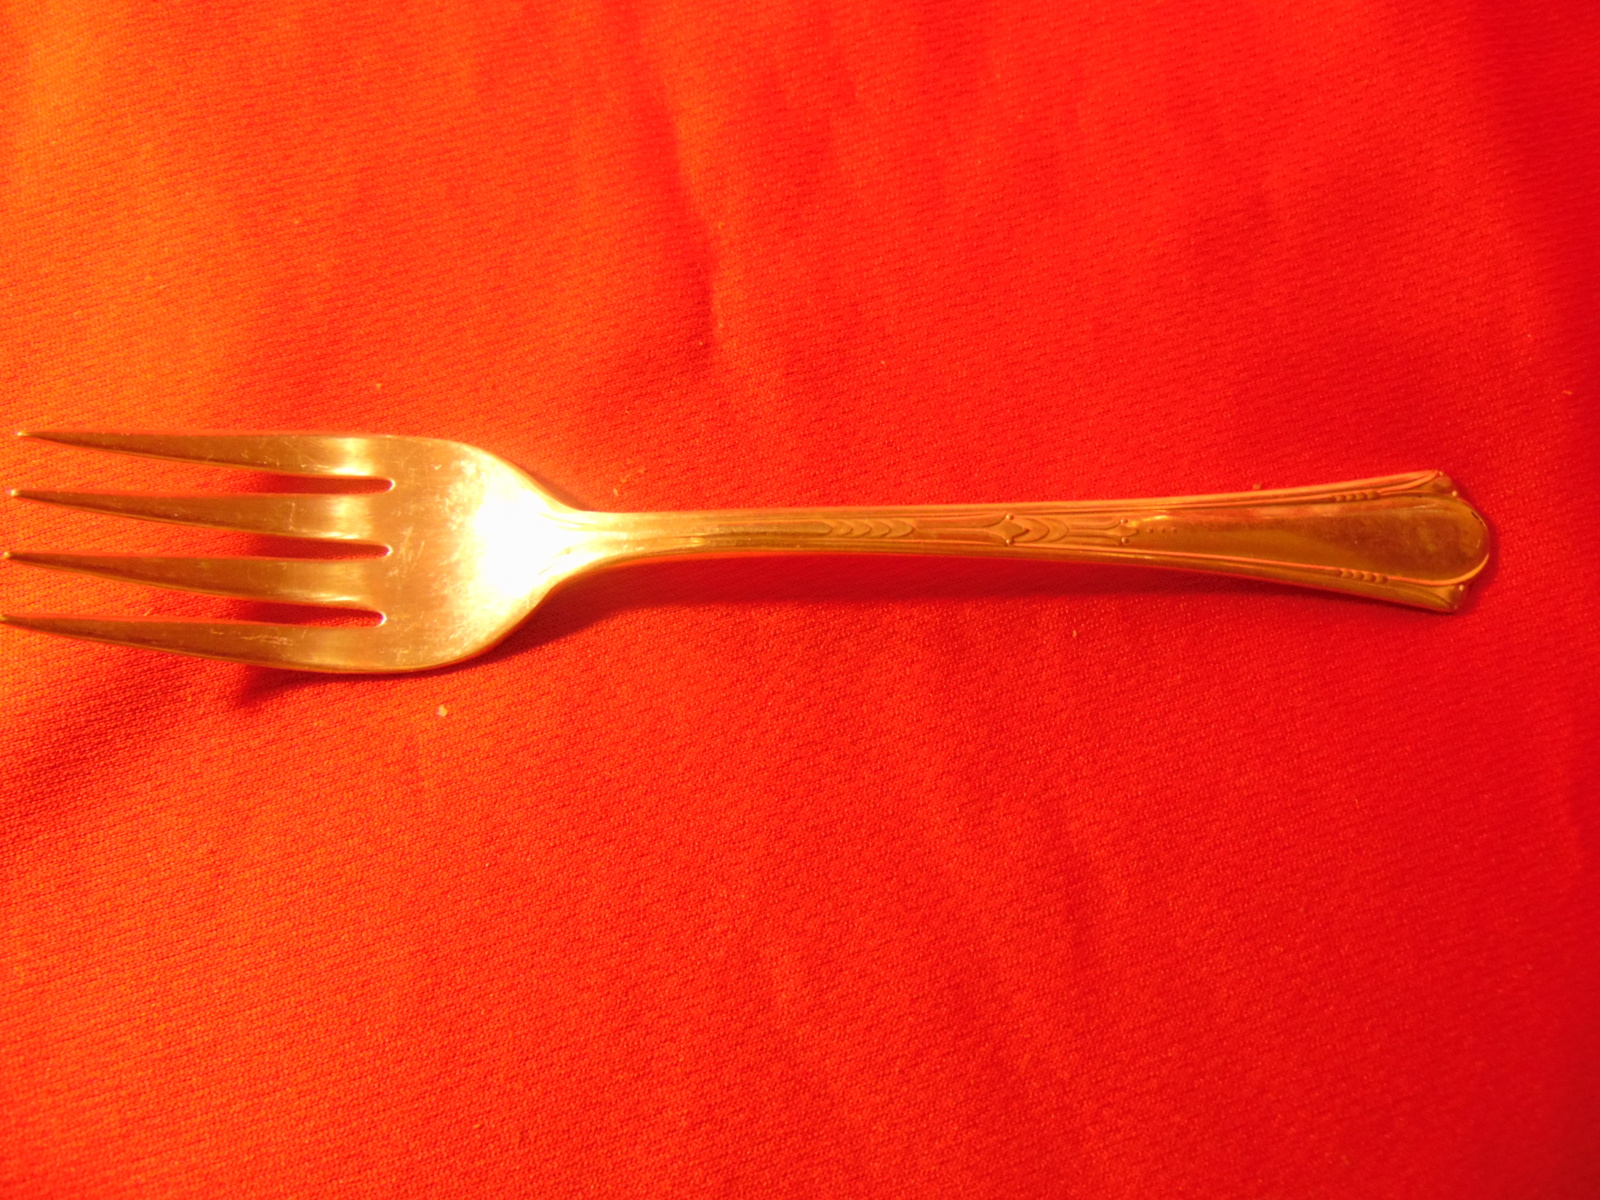 Primary image for 6" S.P. Salad Fork, from Valencia Silver/Inter Sil. in the Valencia Pattern